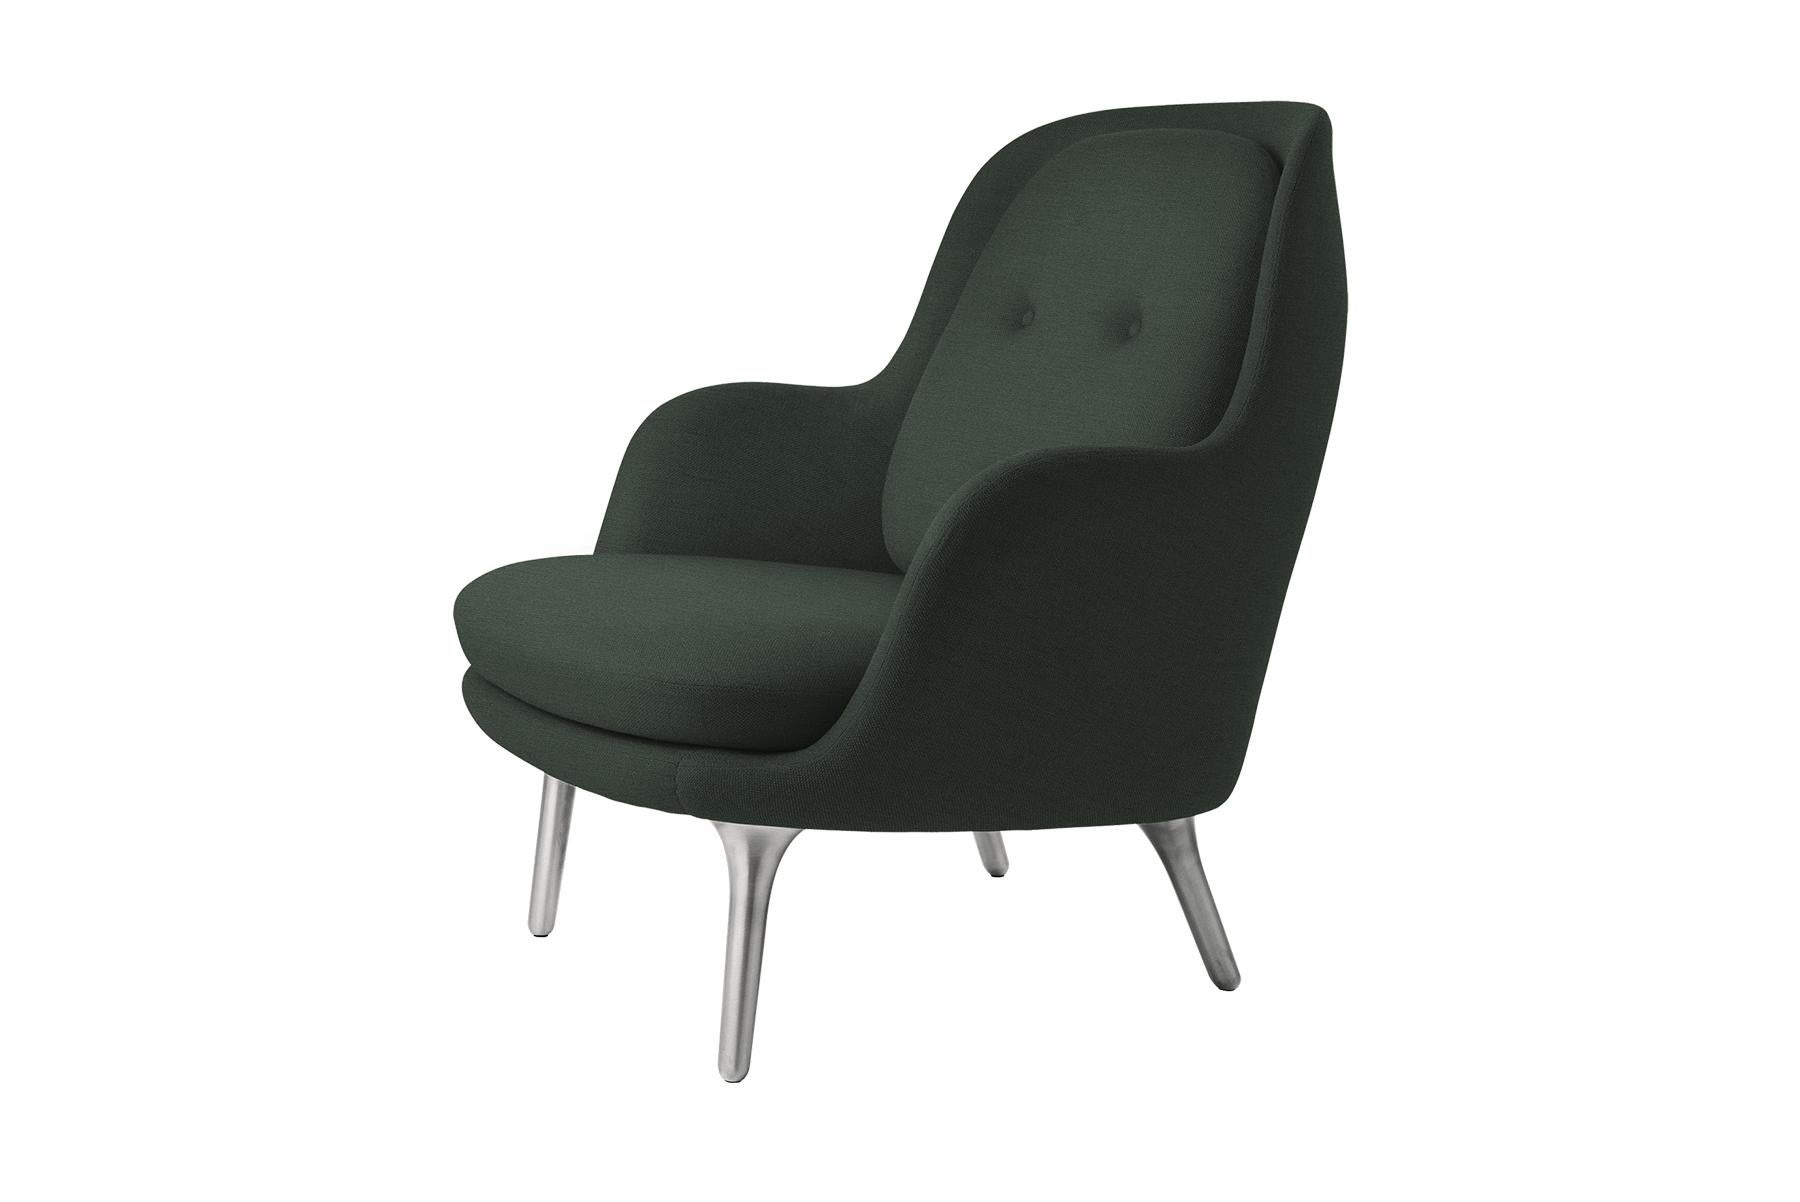 The Fri easy chair illustrates the essence of an open and welcoming chair, that suits any interior with the ambition of a Nordic, serene expression. The Fri easy chair can be upholstered in Fritz Hansen Selection colours in fabric, and the base